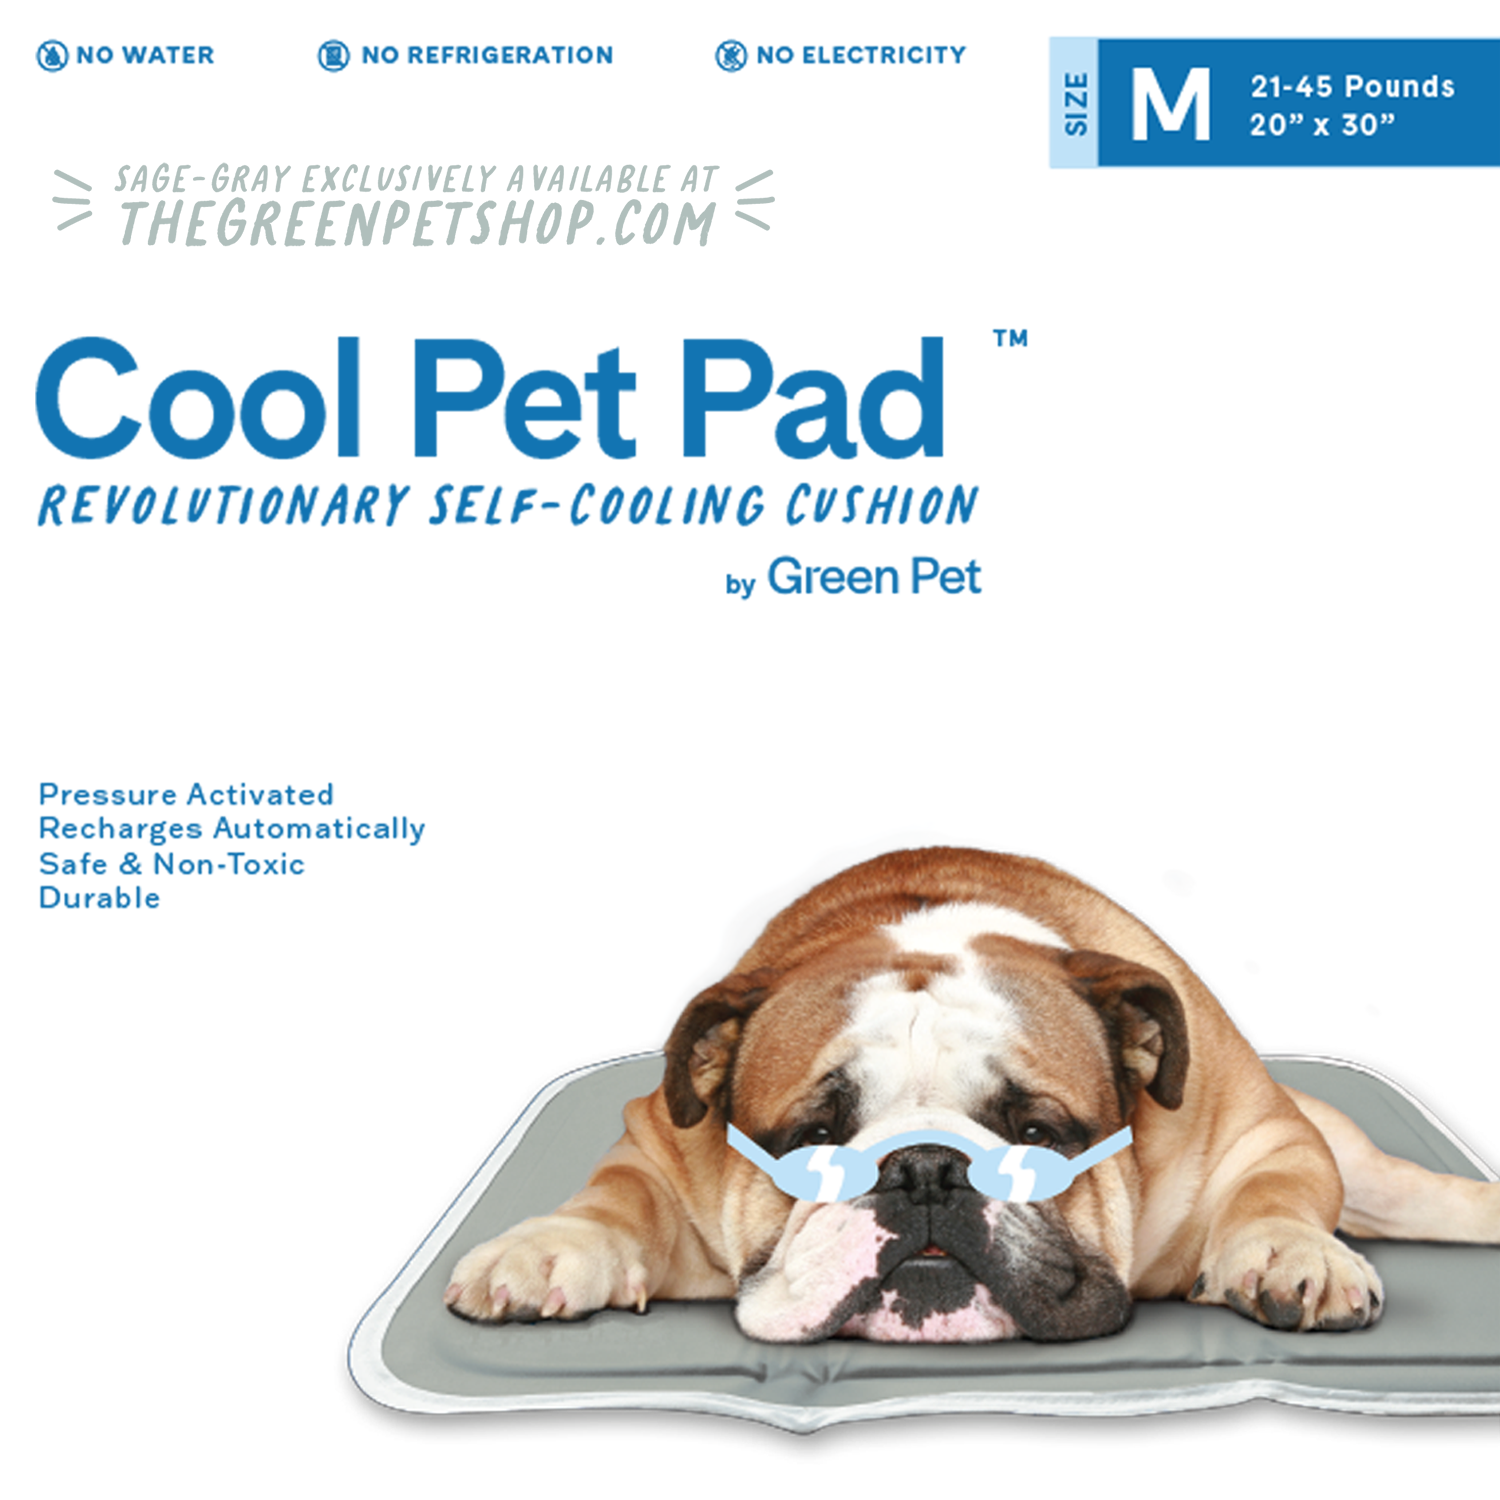 The Best Dog Cooling Mats, Beds, and Pads to Keep Your Pup Cool